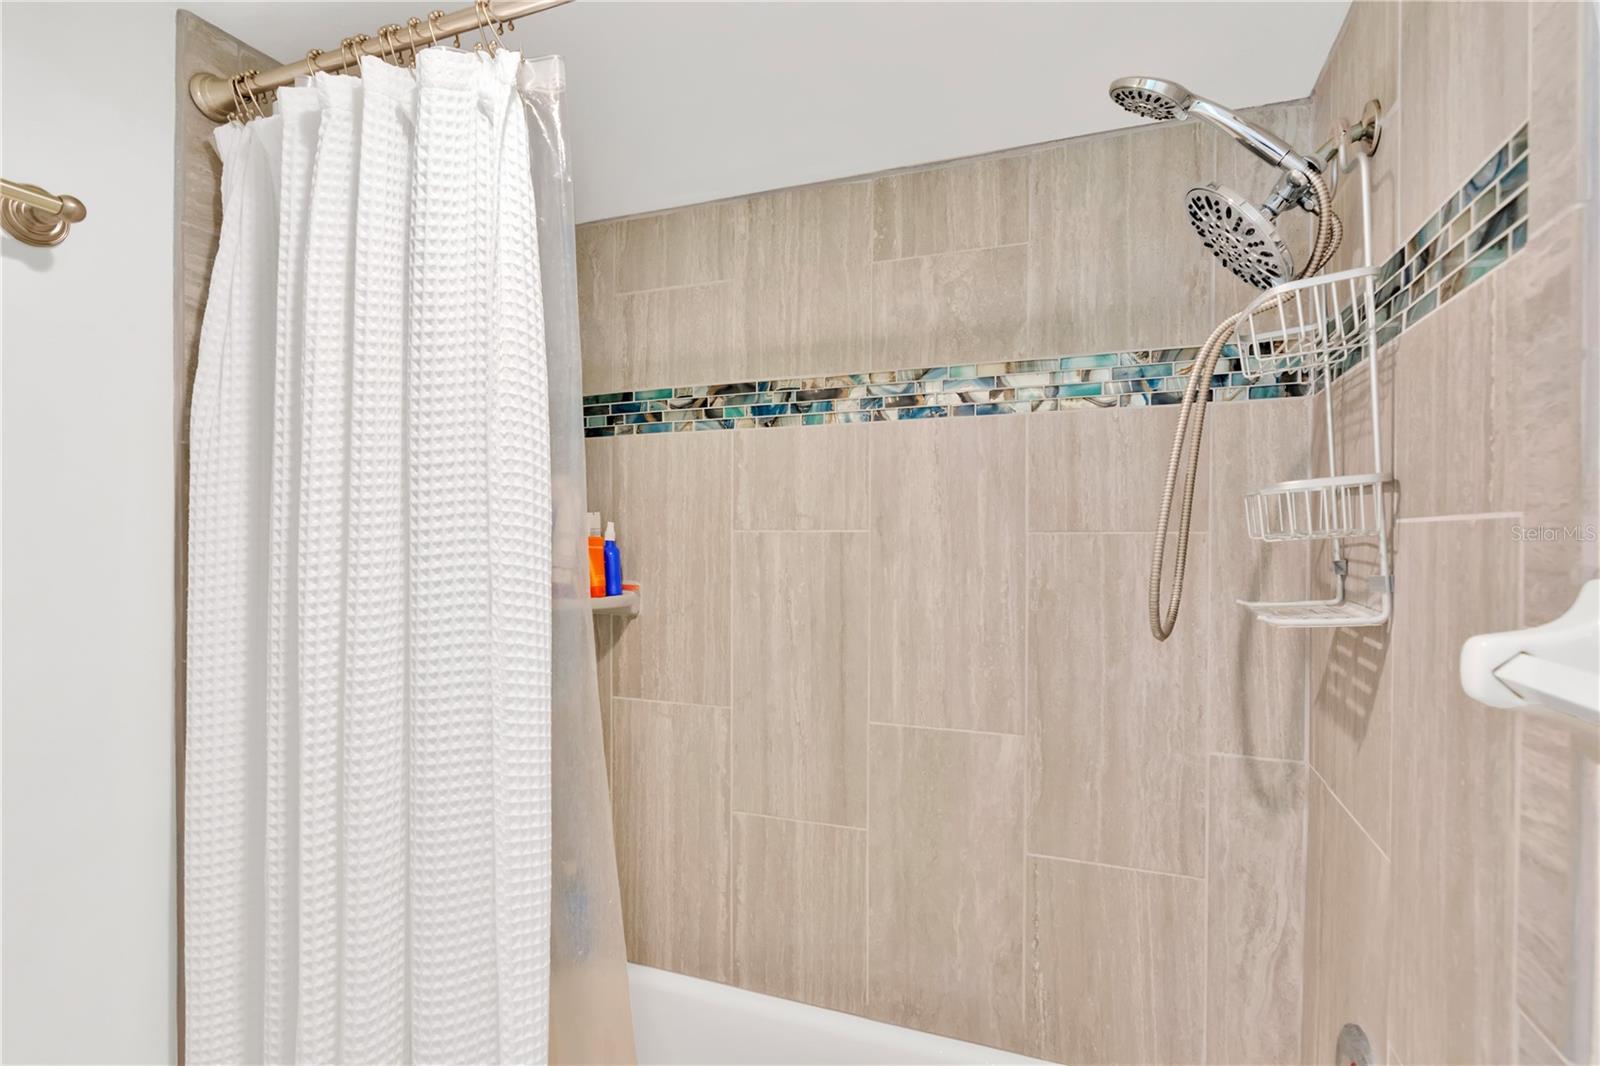 Tub/shower combination with listello accent for added artistic interest.